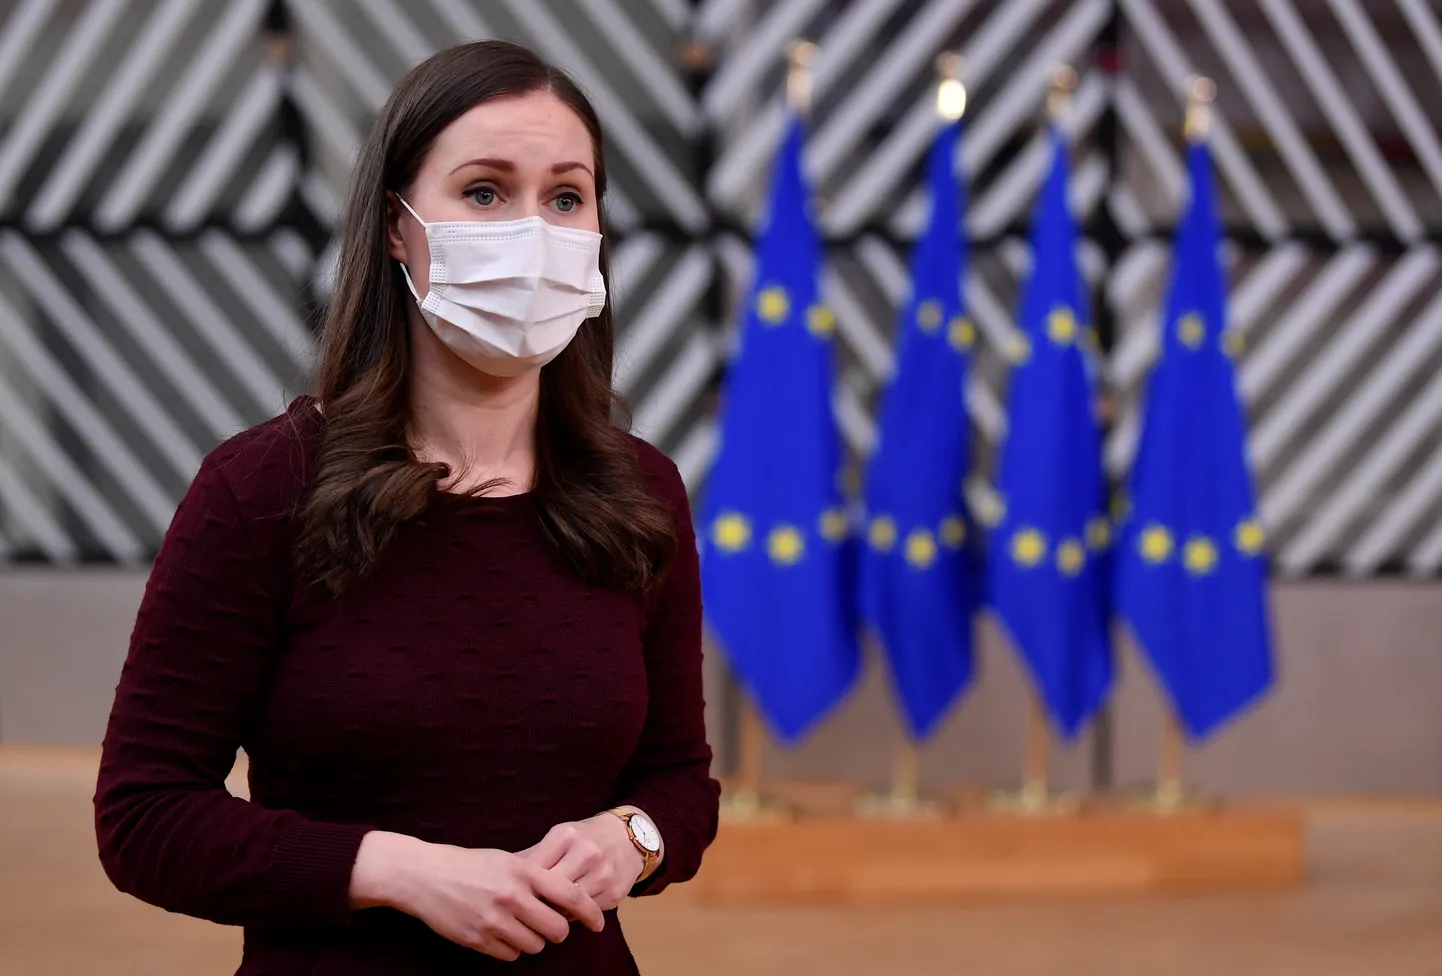 Finland's Prime Minister Sanna Marin speaks as she arrives to attend a face-to-face EU summit amid the coronavirus disease (COVID-19) lockdown in Brussels, Belgium December 10, 2020. John Thys/Pool via REUTERS